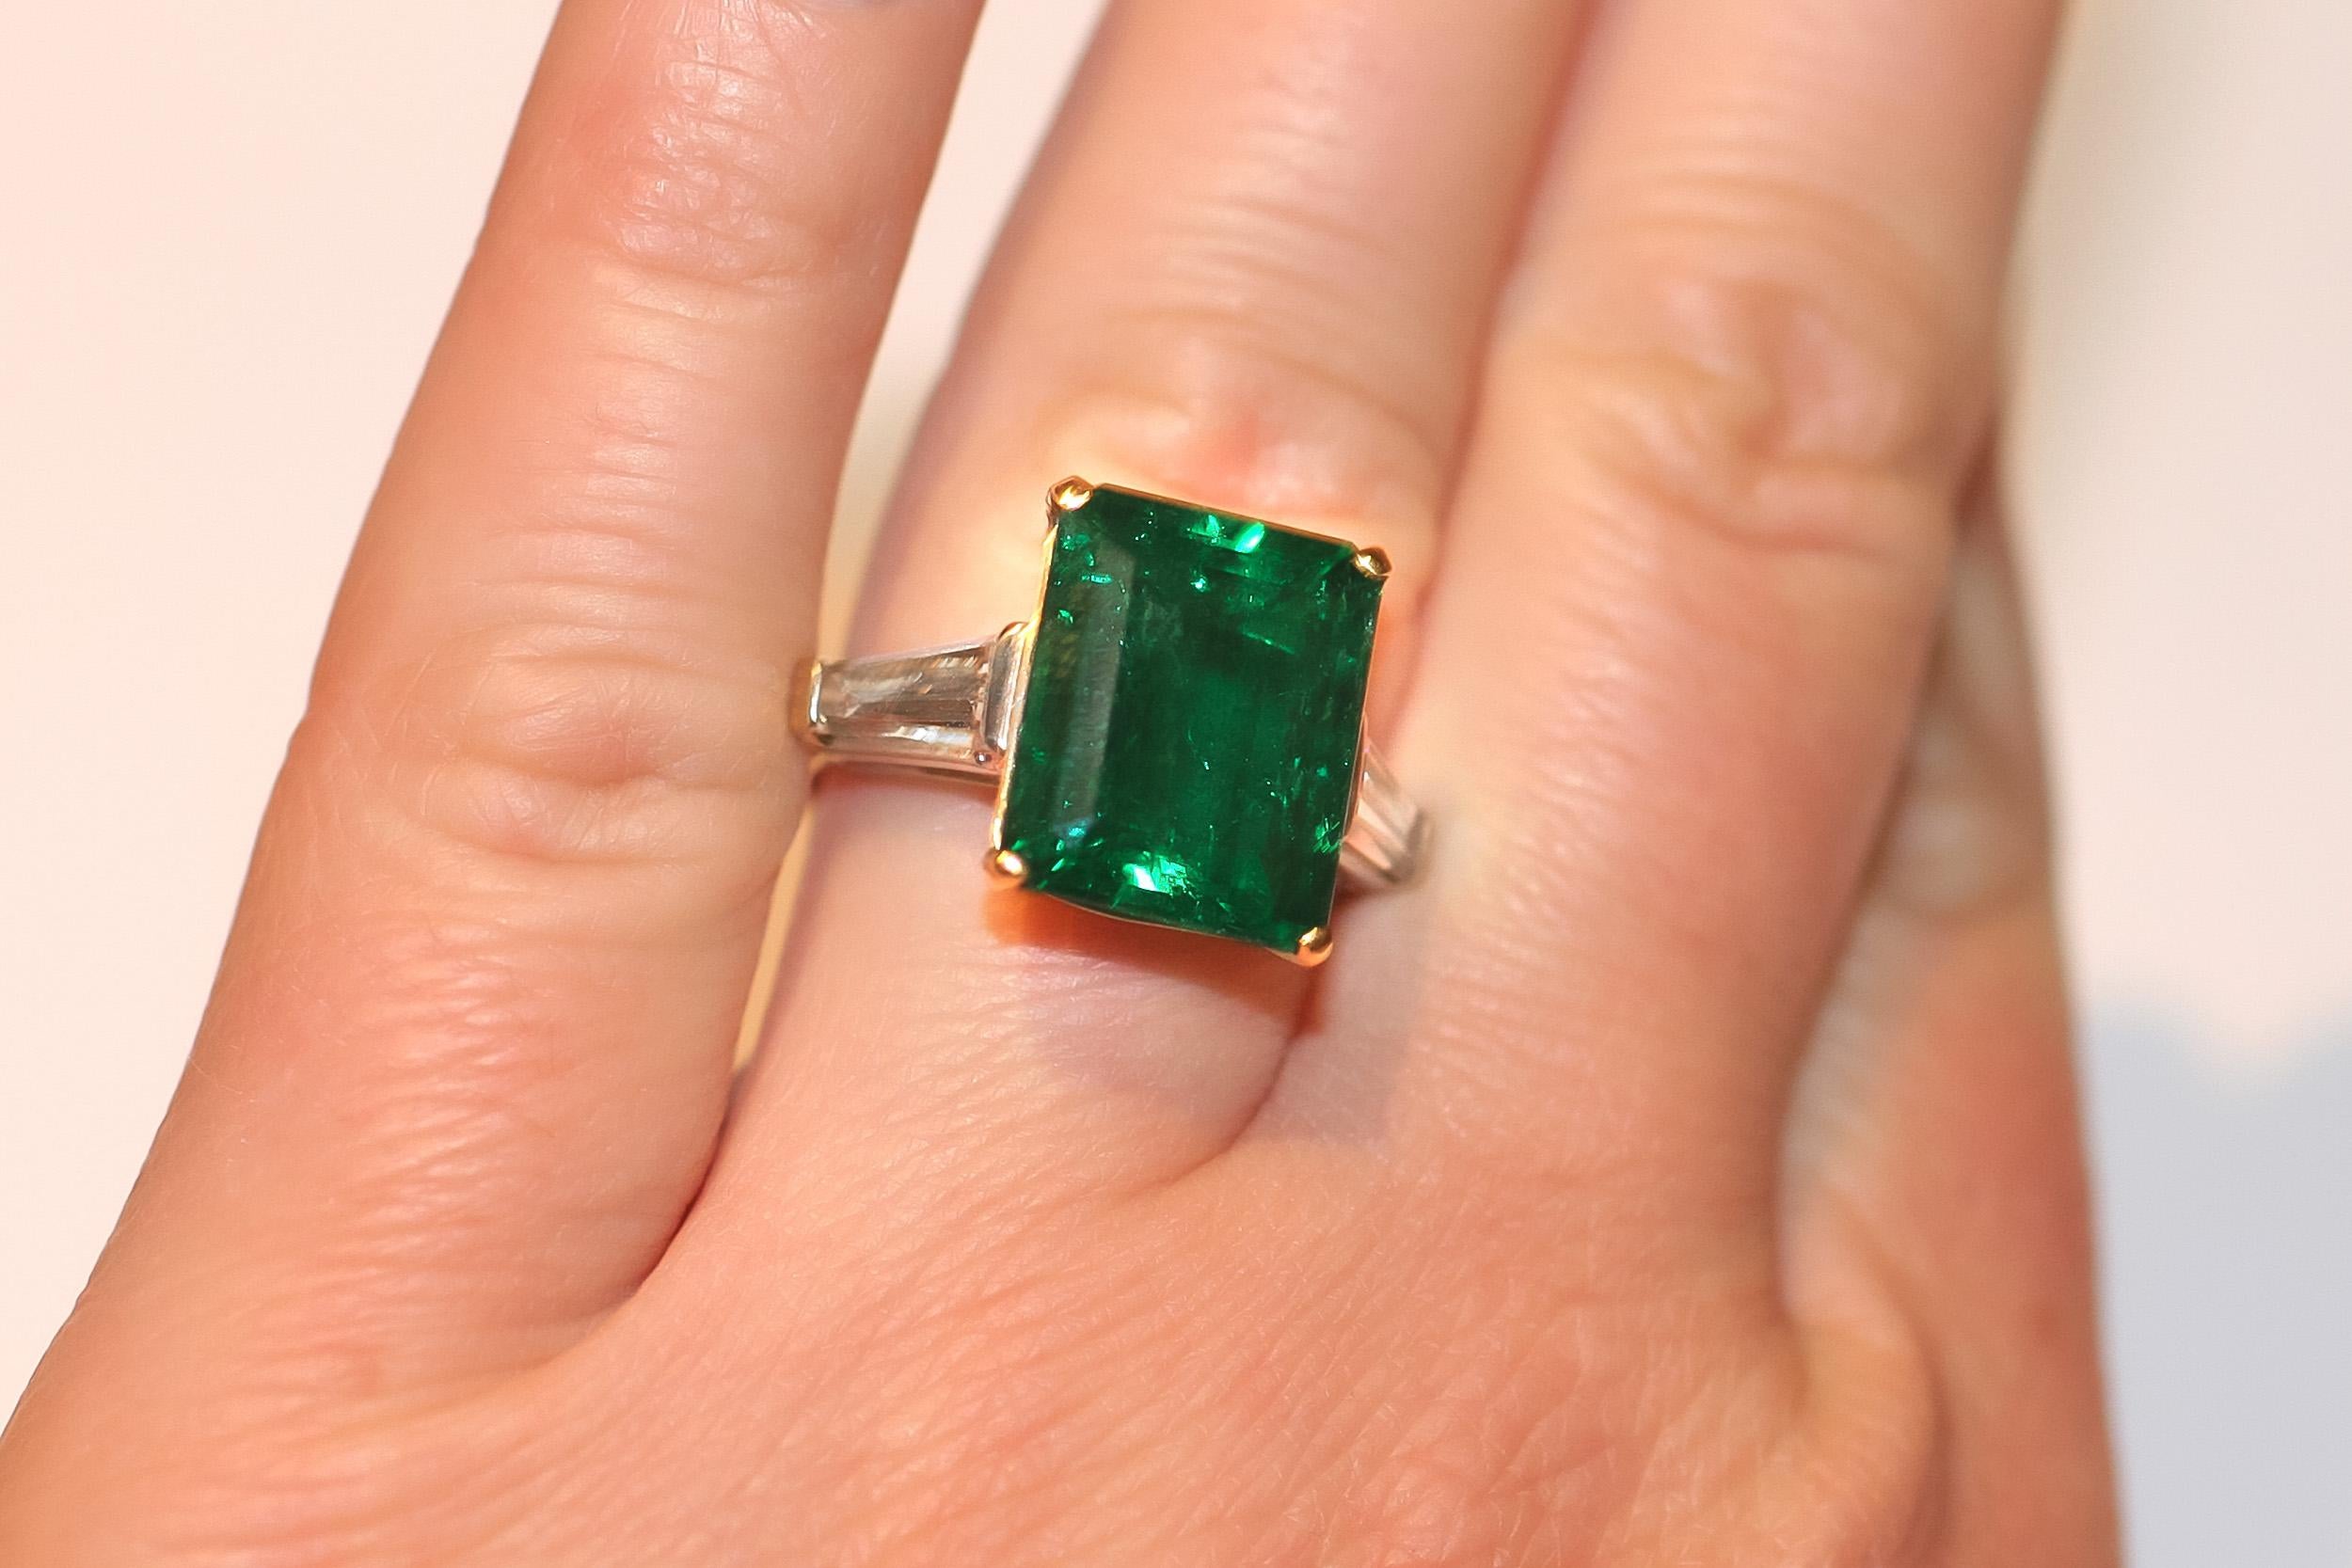 Colombian Green Emerald weighing 6.72 carat set in handmade ring crafted in Platinum and 18k & 18K Yellow Gold with 2 Trapezoid cut Diamonds weighing a total of 0.56 carats. 
AGL # CS55546

Viewings available in our NYC wholesale office by